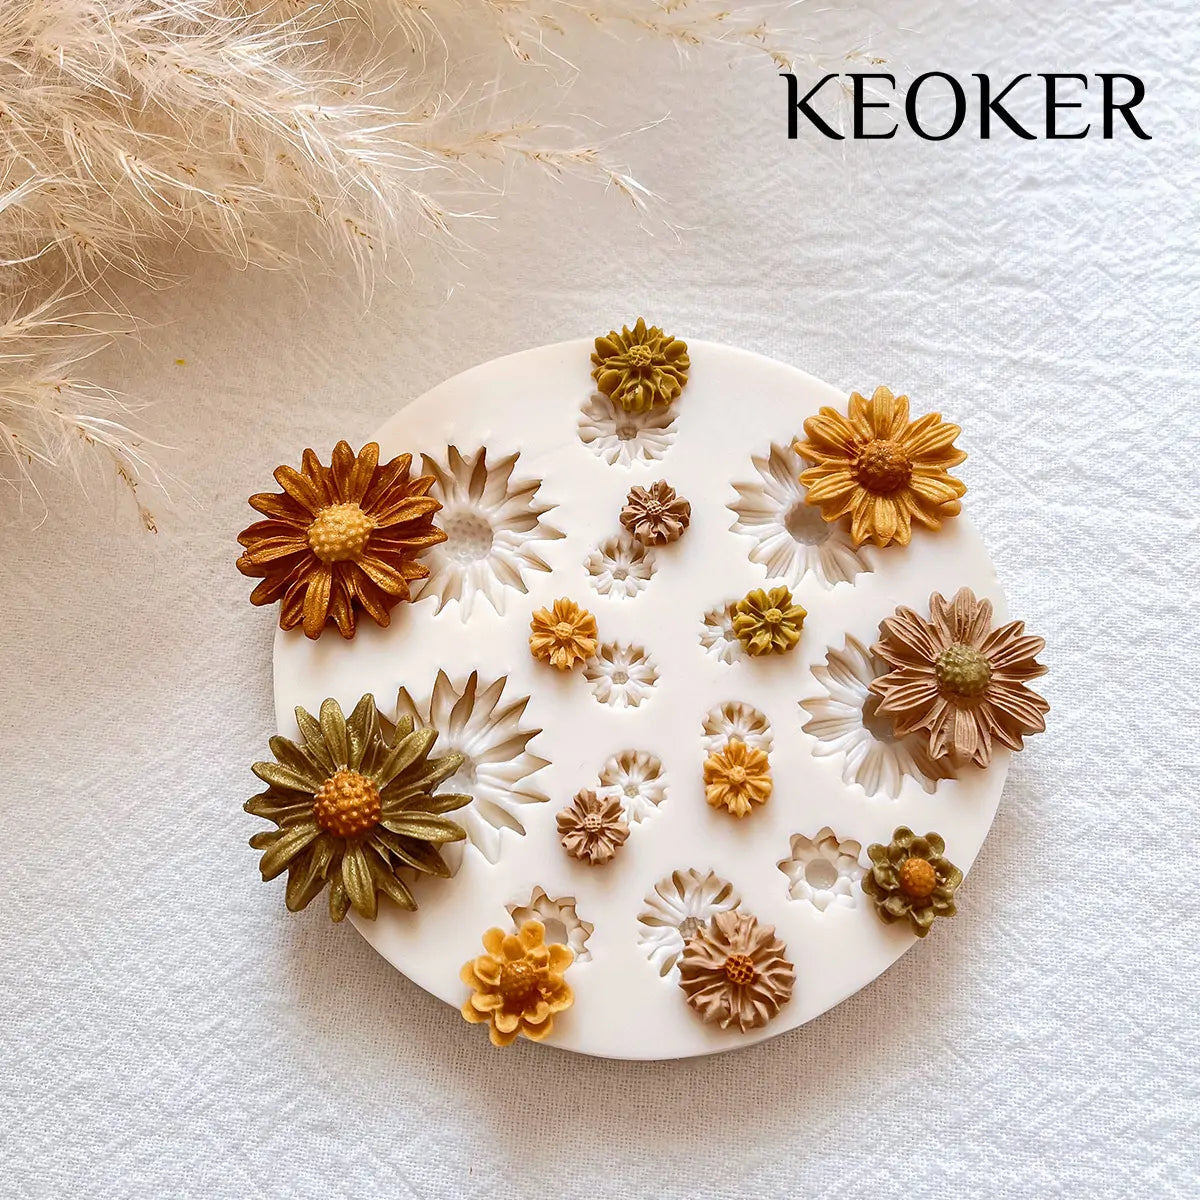 KEOKER Polymer Clay Molds - 12 Pcs Floral Polymer Clay Molds for Jewelry  Making, Mini Clay Molds, Polymer Clay Molds for Polymer Clay Earrings